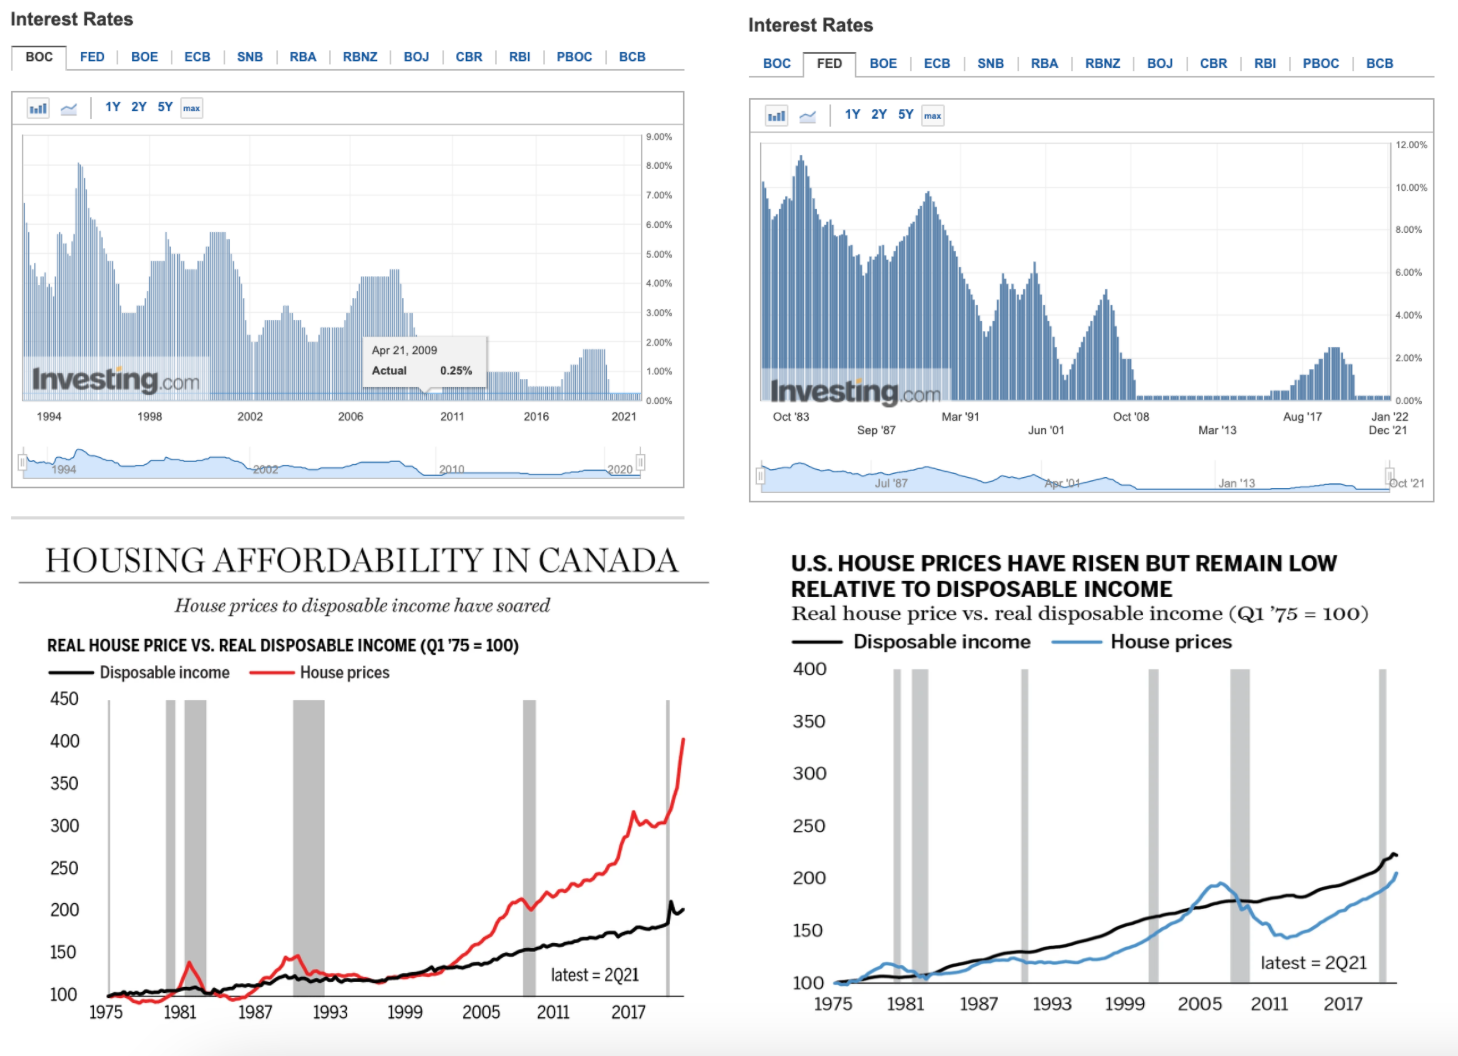 Source: Investing.com, National Post While Canada and the U.S. have operated in similar lower interest rate environments since 2008,  housing affordability in the U.S. has remained little changed in the last 3 decades. In Canada, it’s a very different story. The gap between real house prices vs. disposable income has consistently widened since the crisis,  accelerating during the pandemic and until Q2 2021, the last period for which this data is currently available.